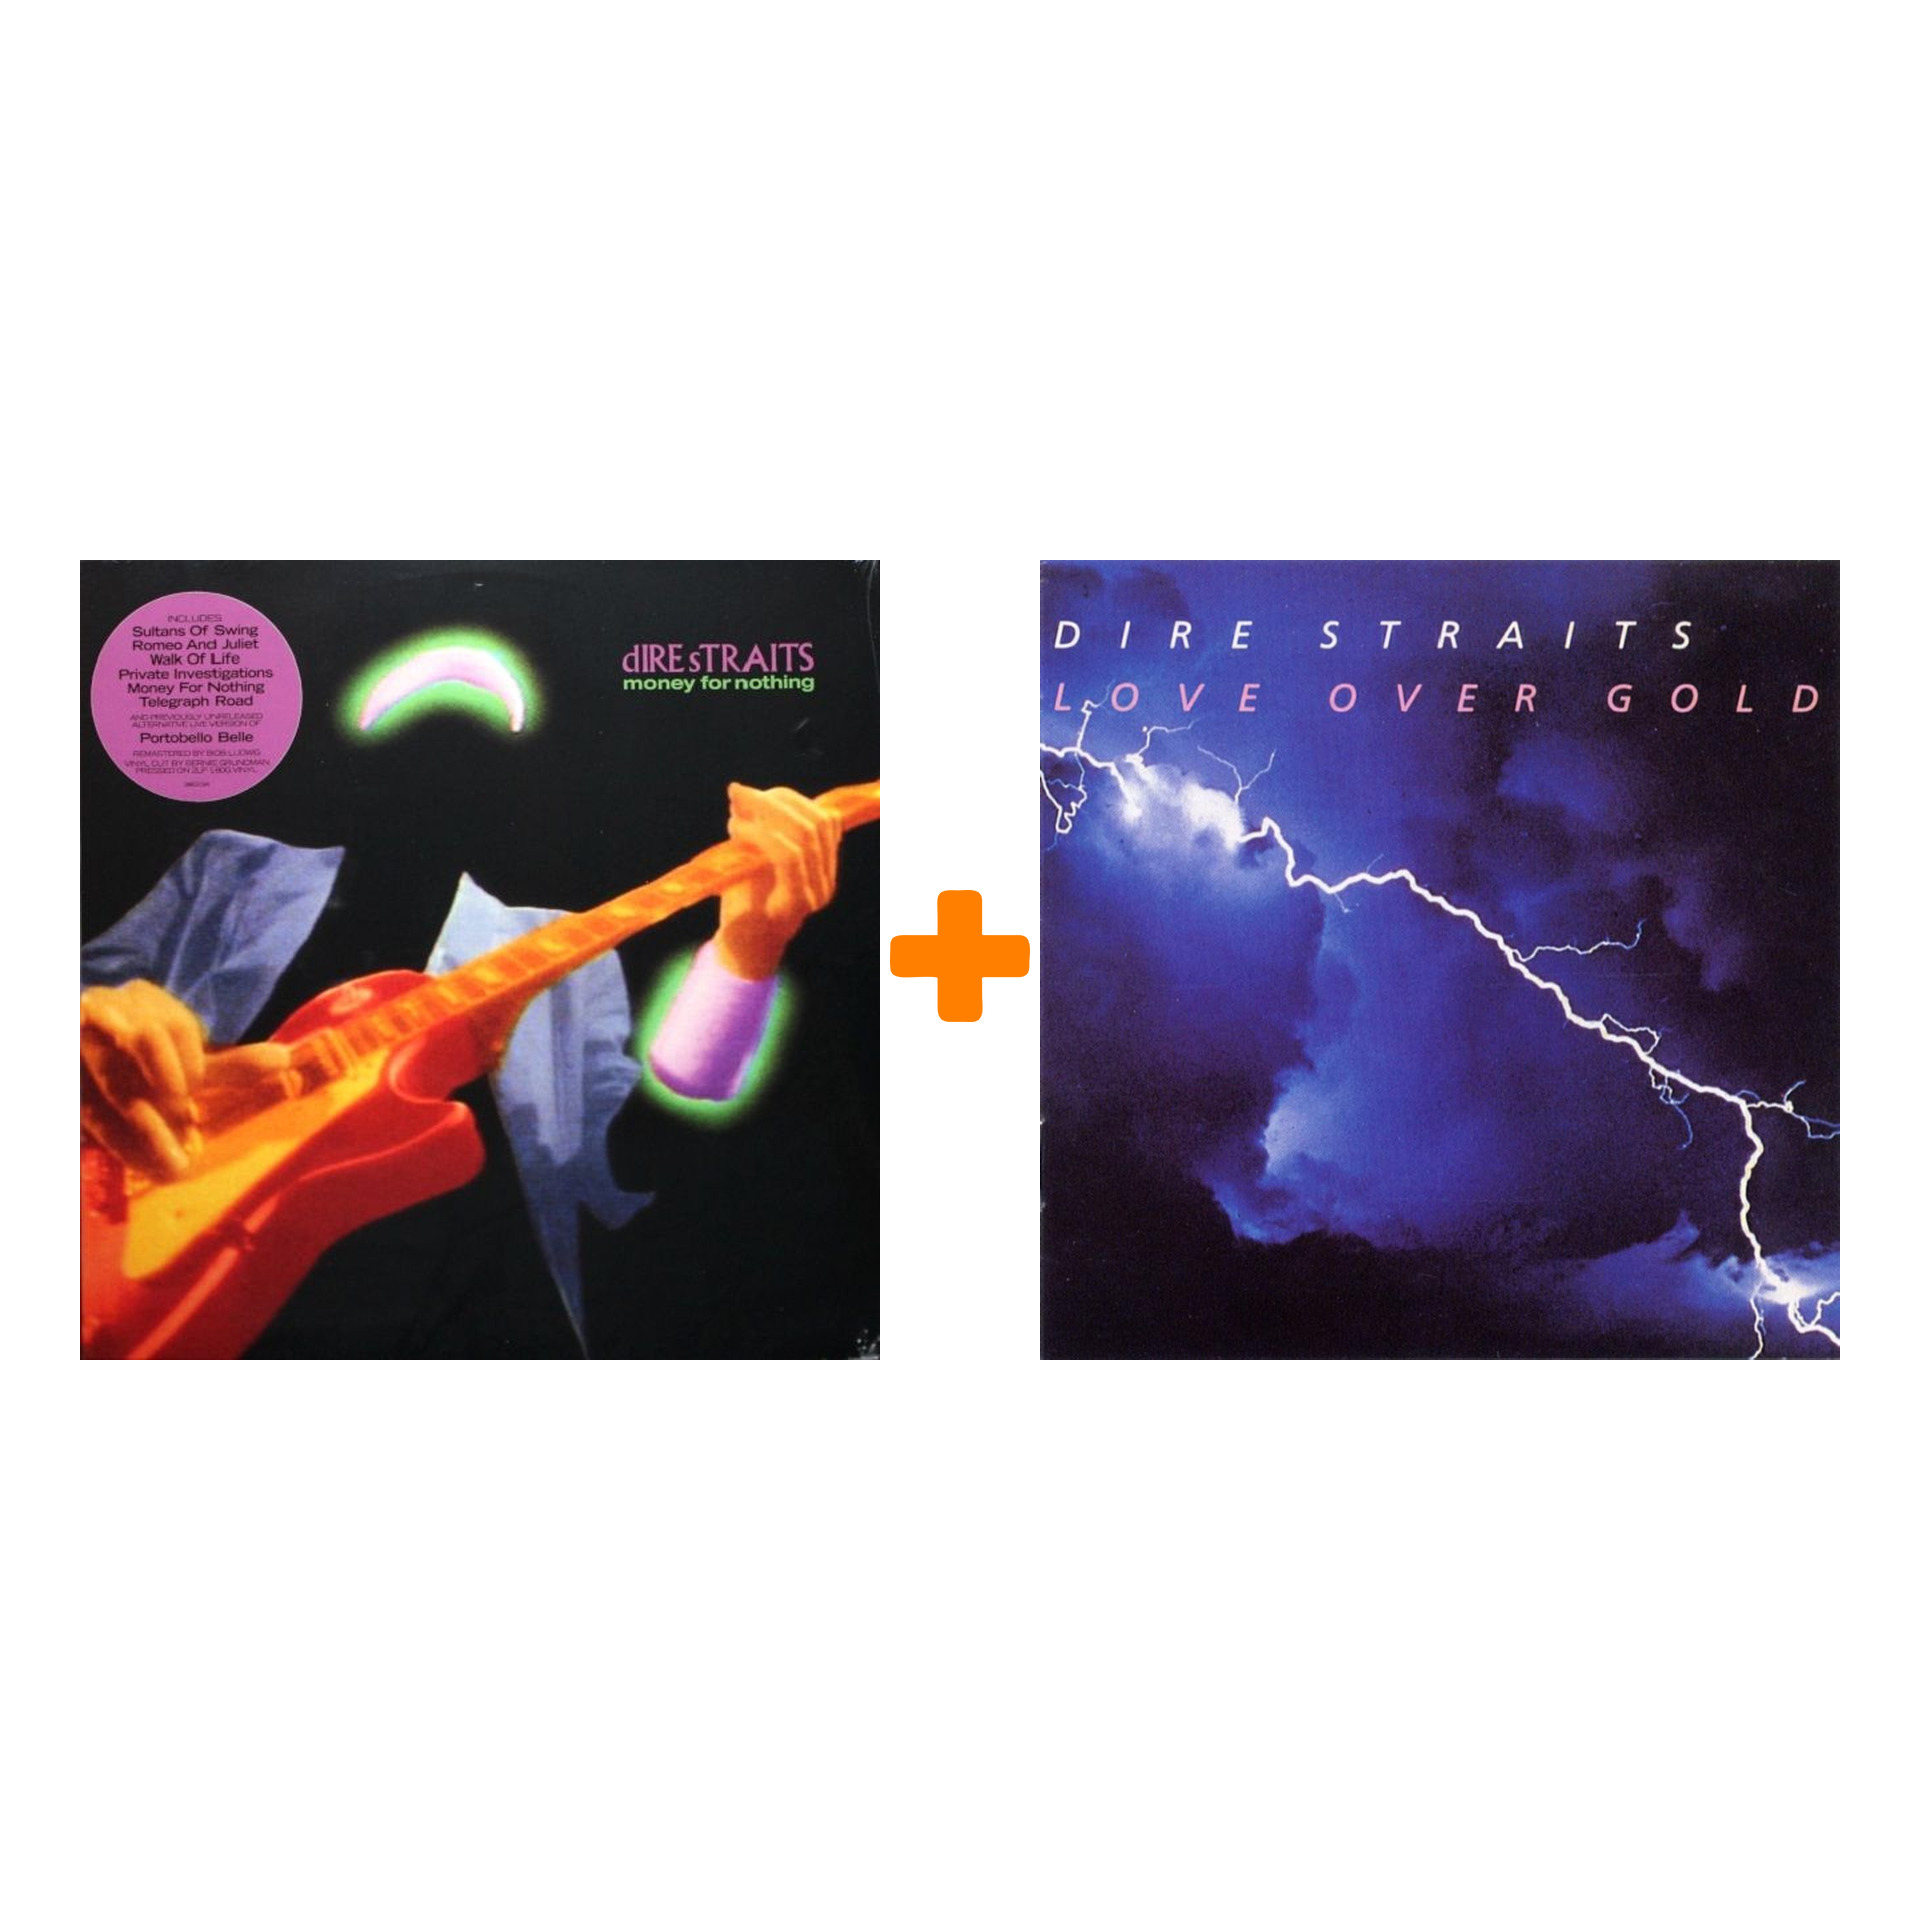 цена DIRE STRAITS Money For Nothing Greatest Hits 2LP / Love Over Gold LP Набор